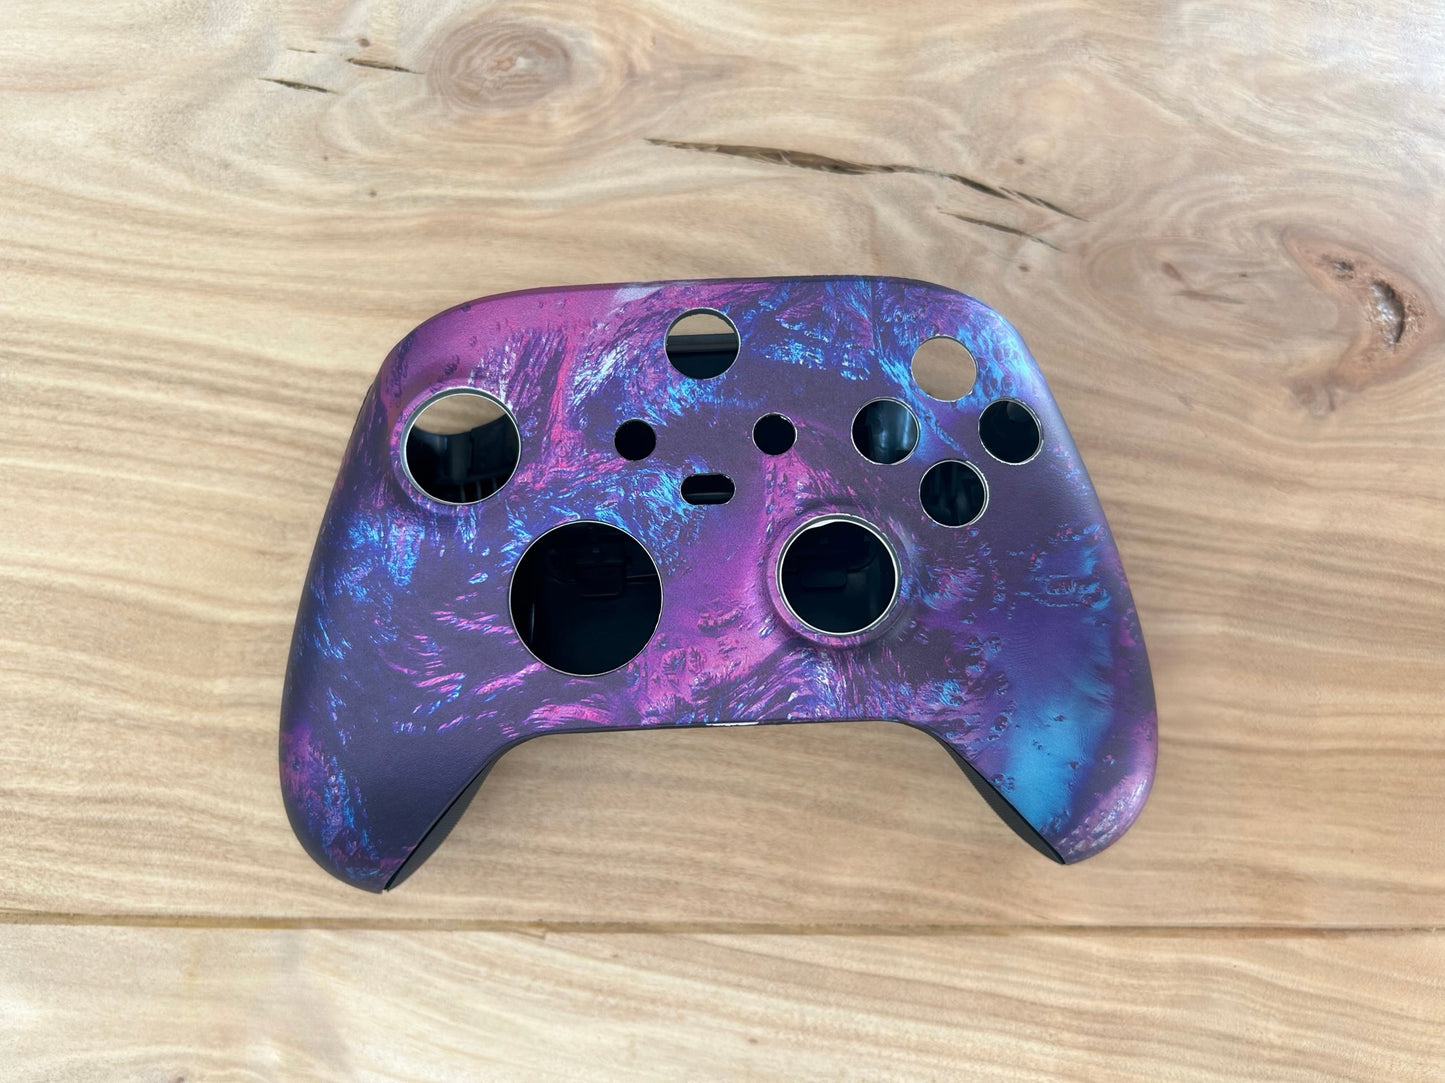 Xbox series controller hydro dipped Faceplates and casing